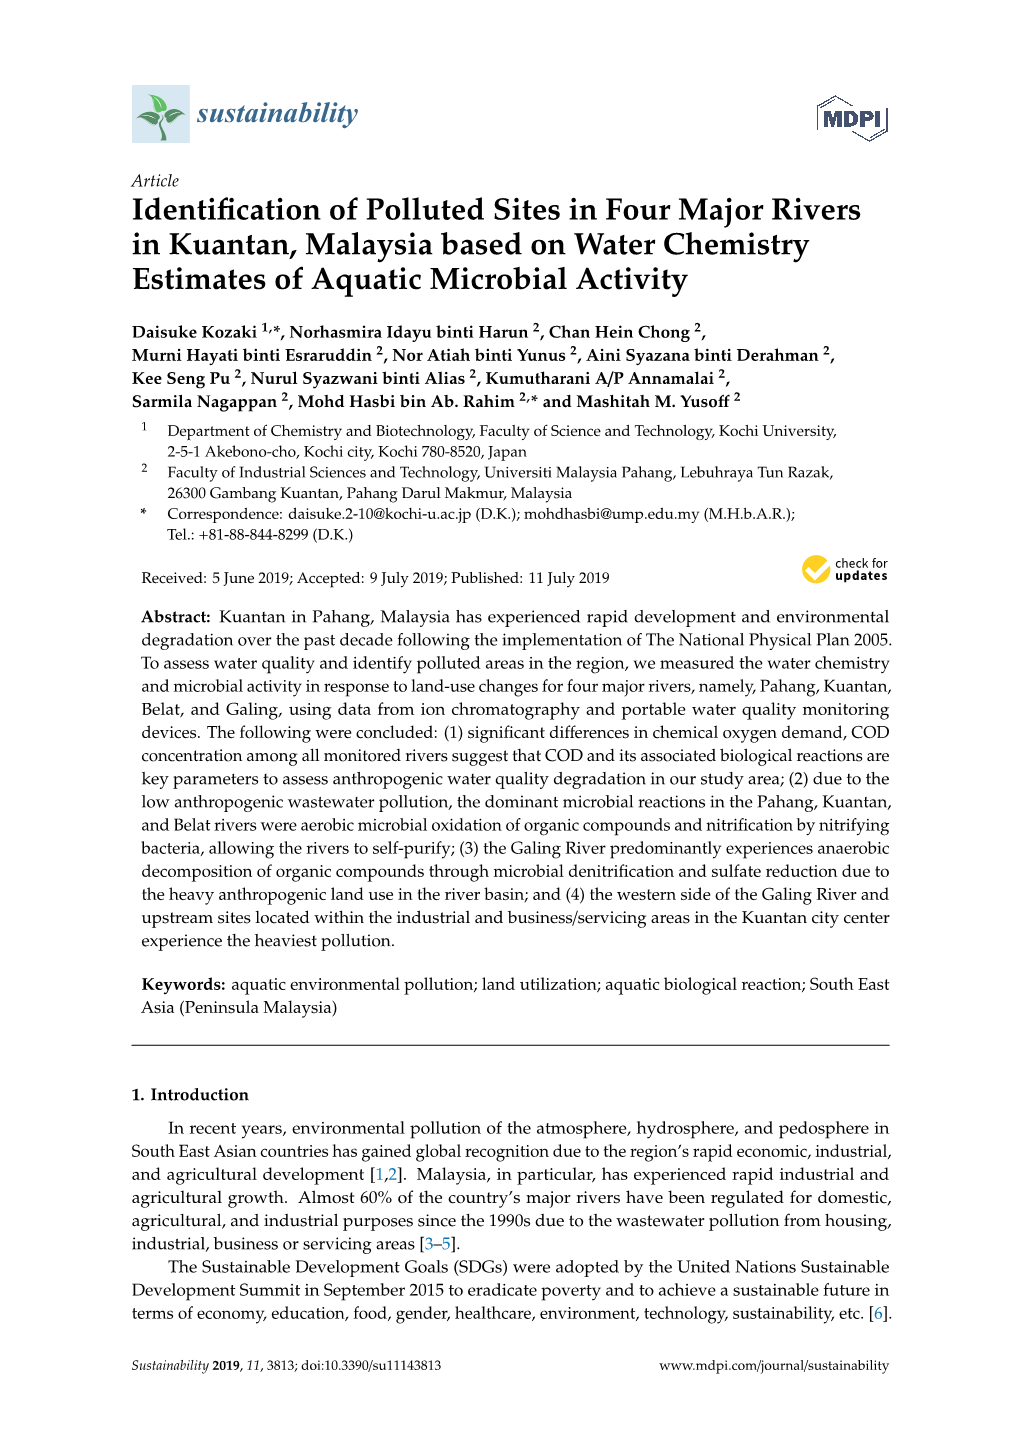 Identification of Polluted Sites in Four Major Rivers in Kuantan, Malaysia